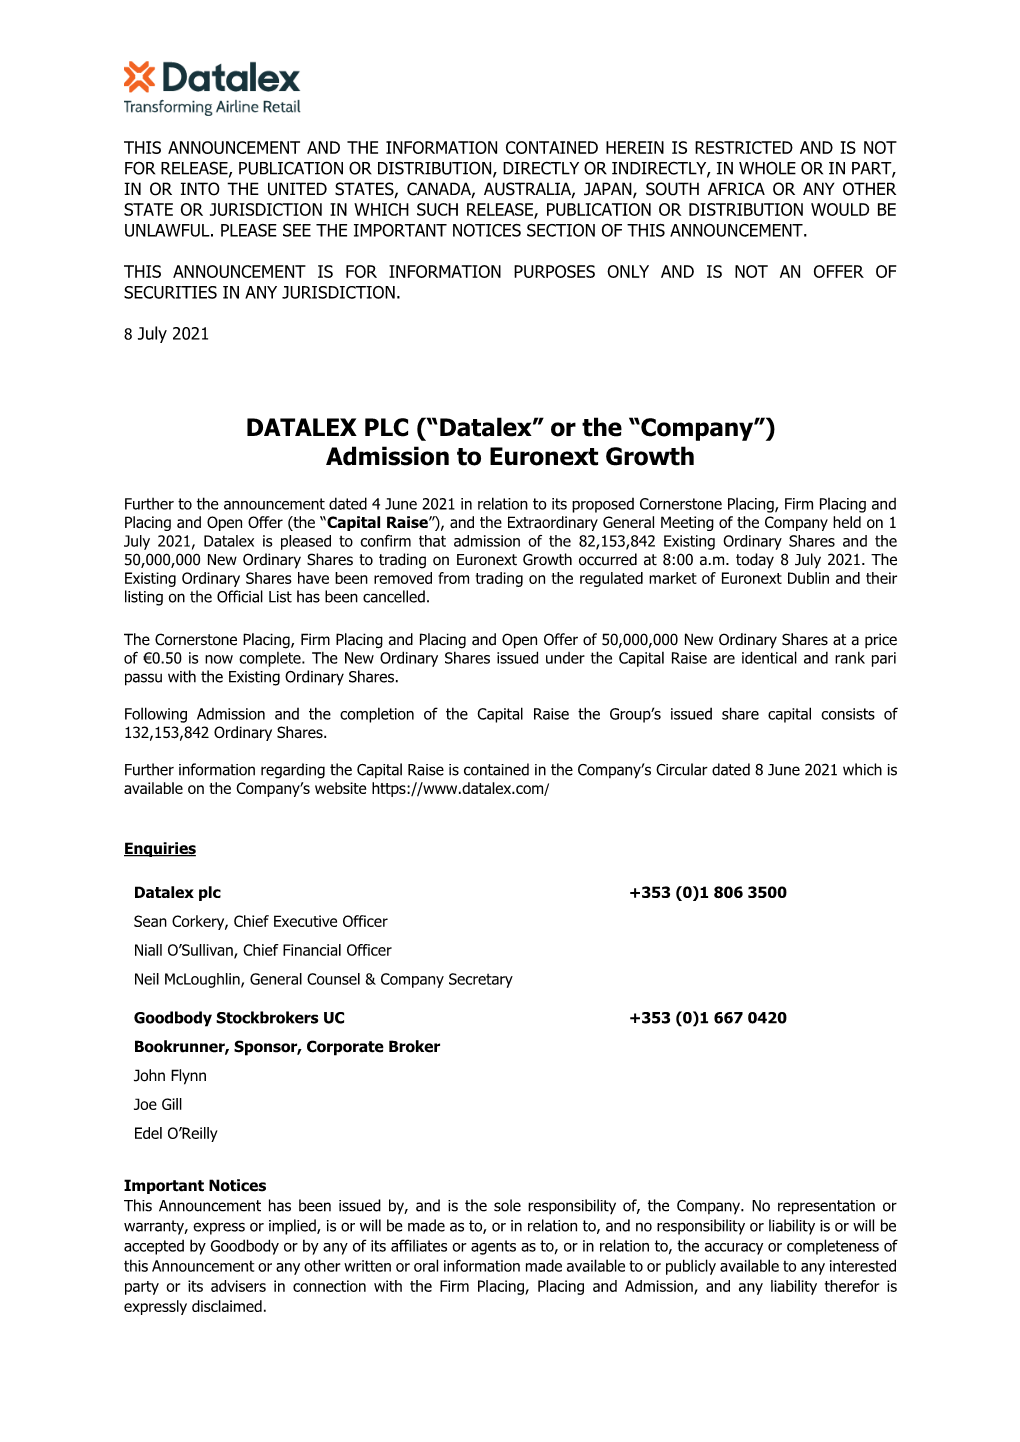 (“Datalex” Or the “Company”) Admission to Euronext Growth